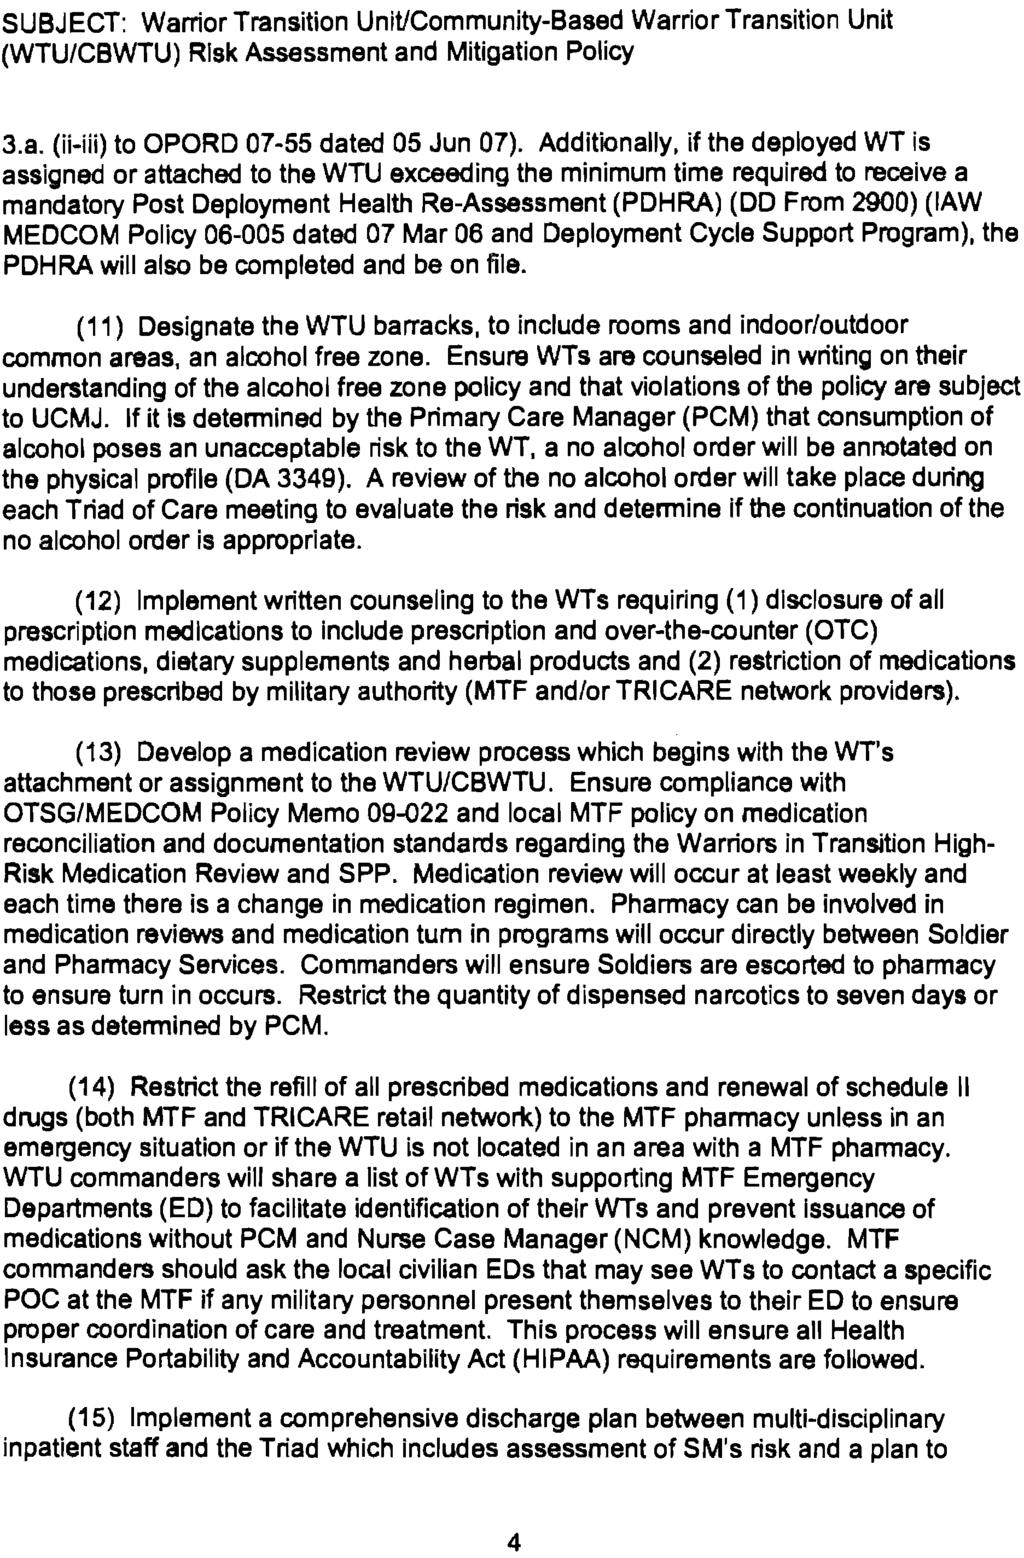 SUBJECT: Warrior Transition Unit/Community-Based Warrior Transition Unit (WTU/CBWTU) Risk Assessment and Mitigation Policy 3.a. (ii-hi) to OPORD 07-55 dated 05 Jun 07).